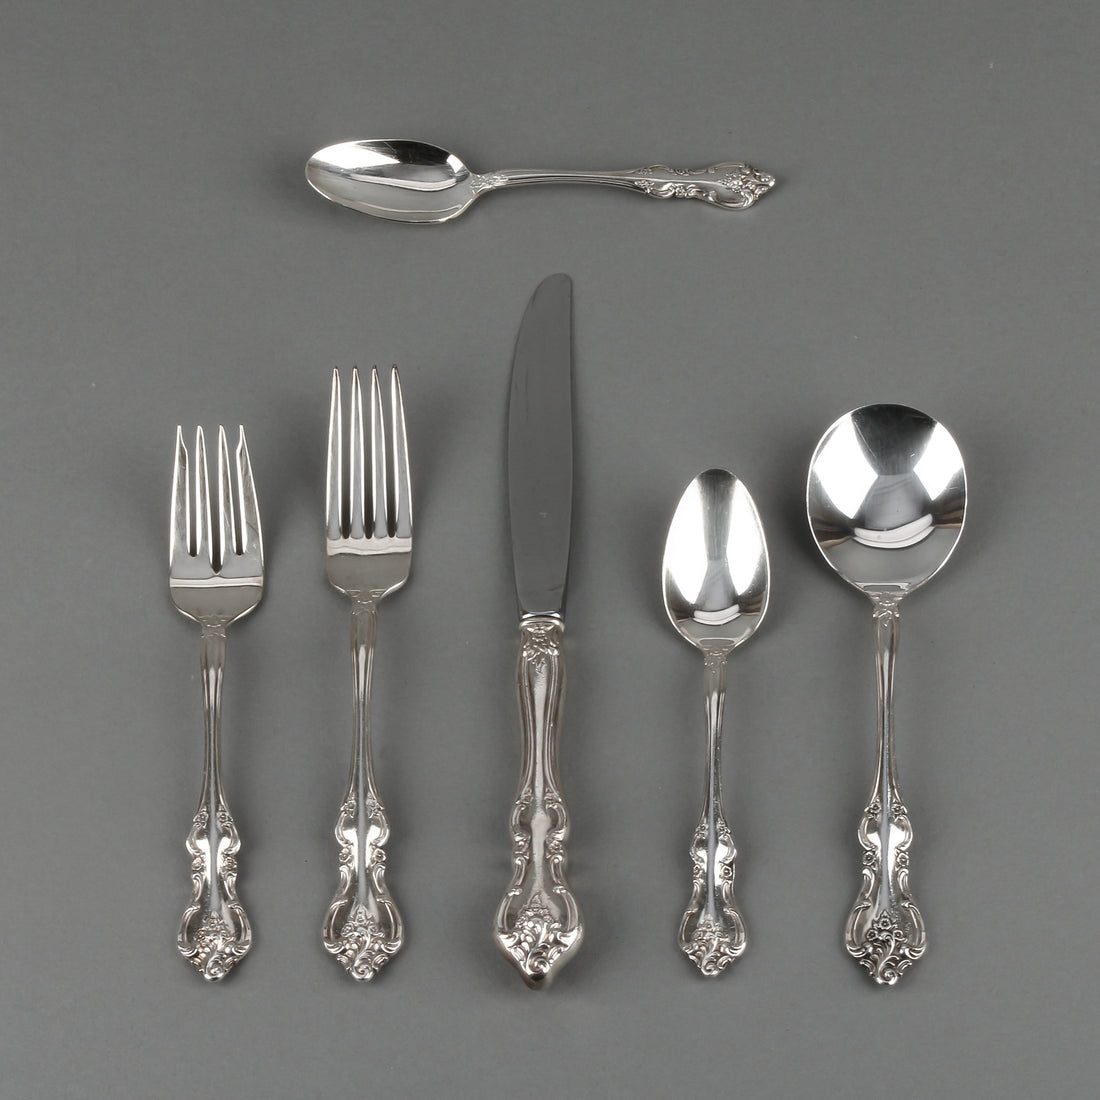 1847 ROGERS BROS. Orleans Silverplate Flatware - 8 Place Settings